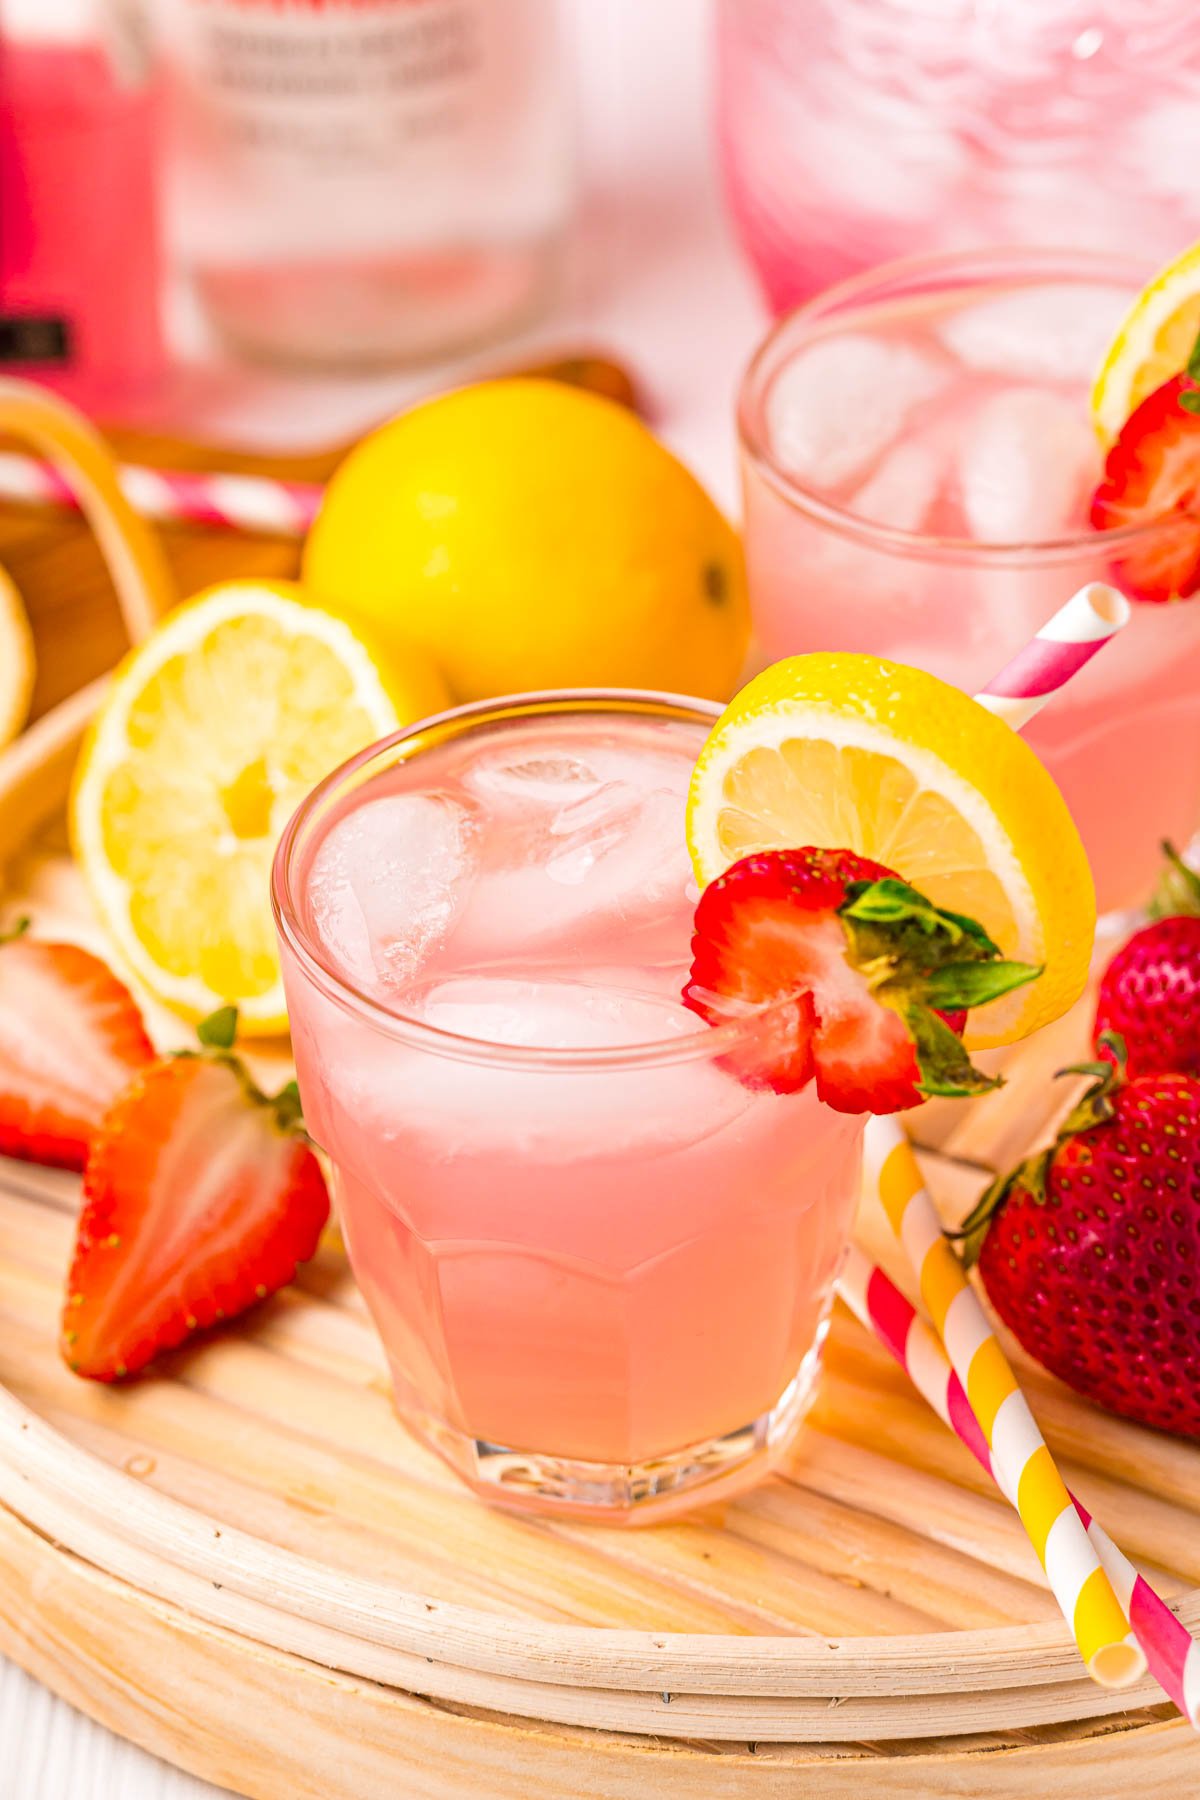 Close up photo of a glass of pink lemonade cocktail on a rattan tray garnished with lemon and strawberry.